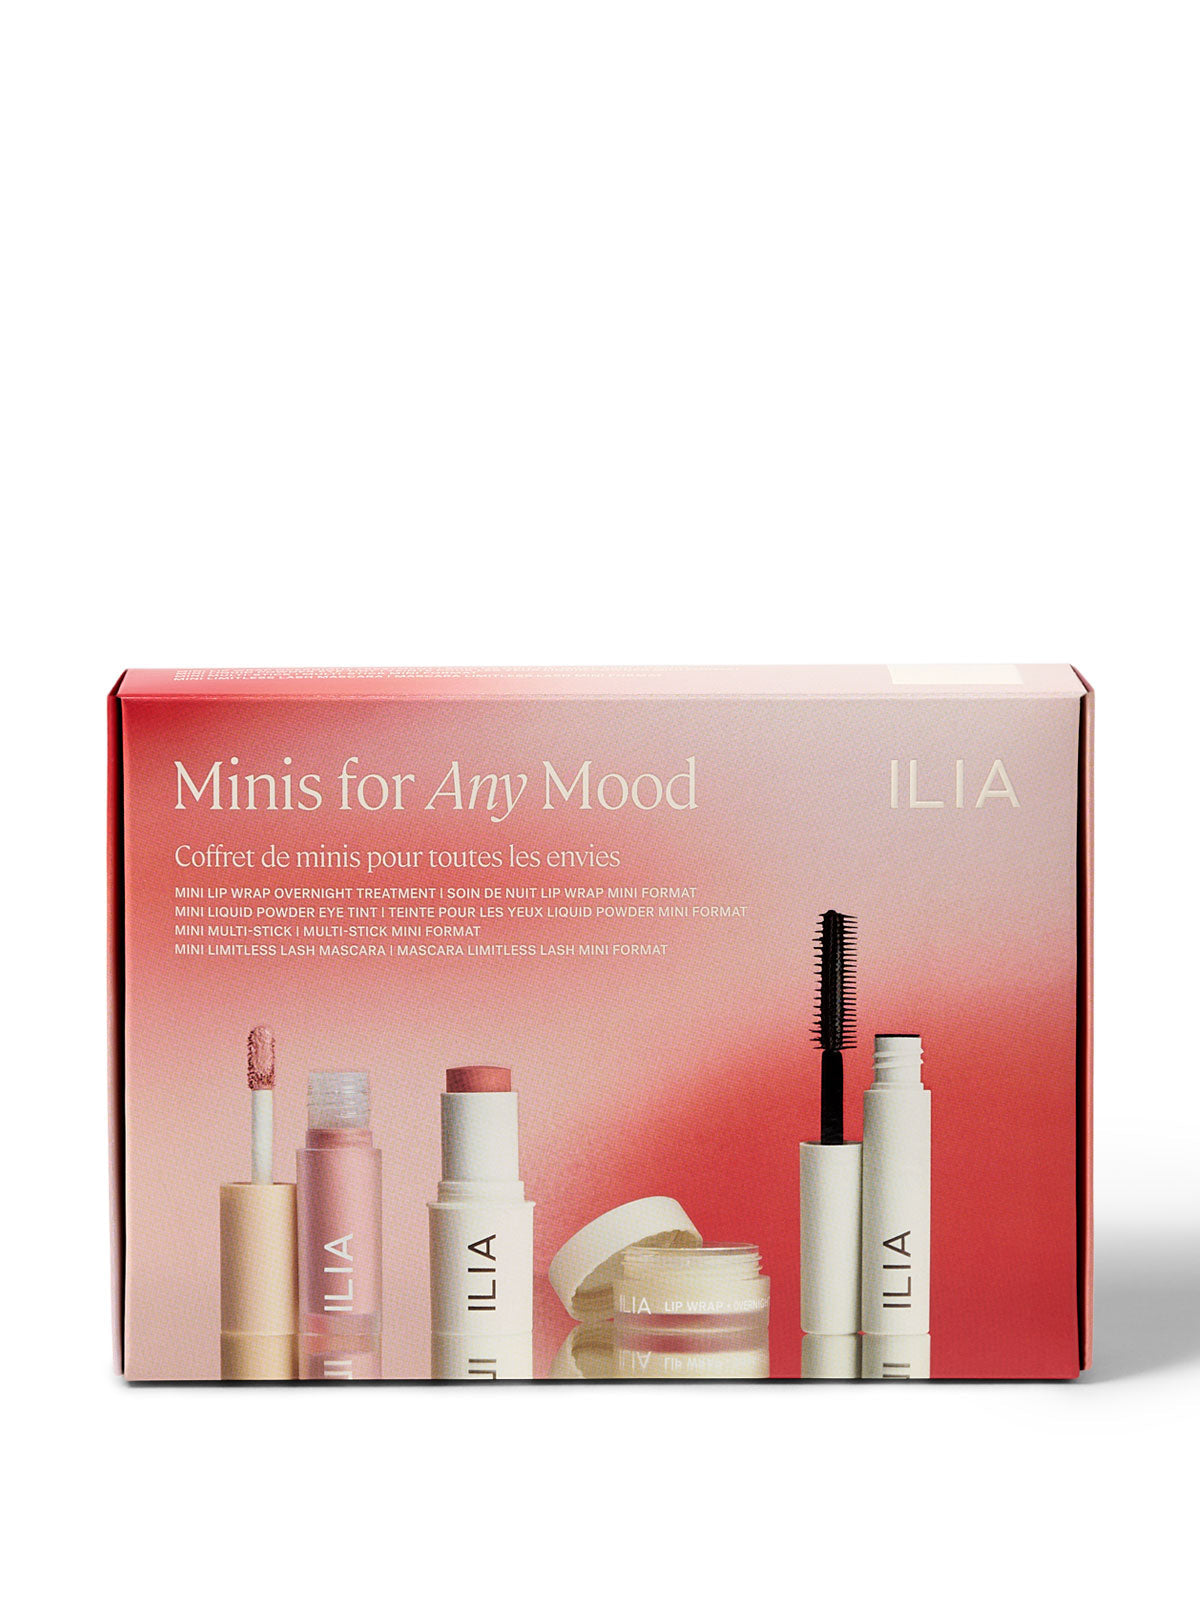 Free Minis for Any Mood Set